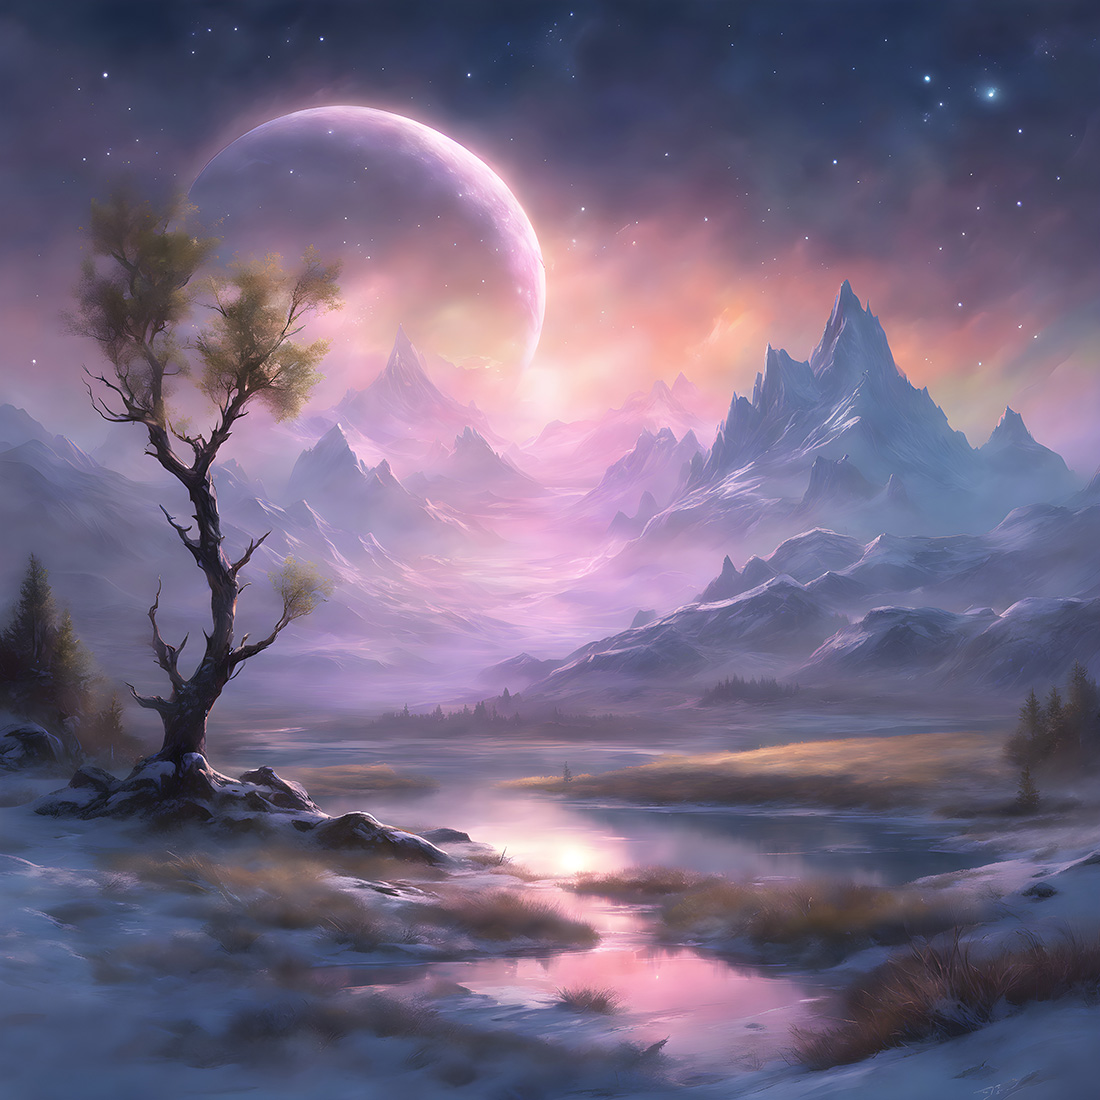 Fantasy plains, lakes, snowy mountains in the distance preview image.